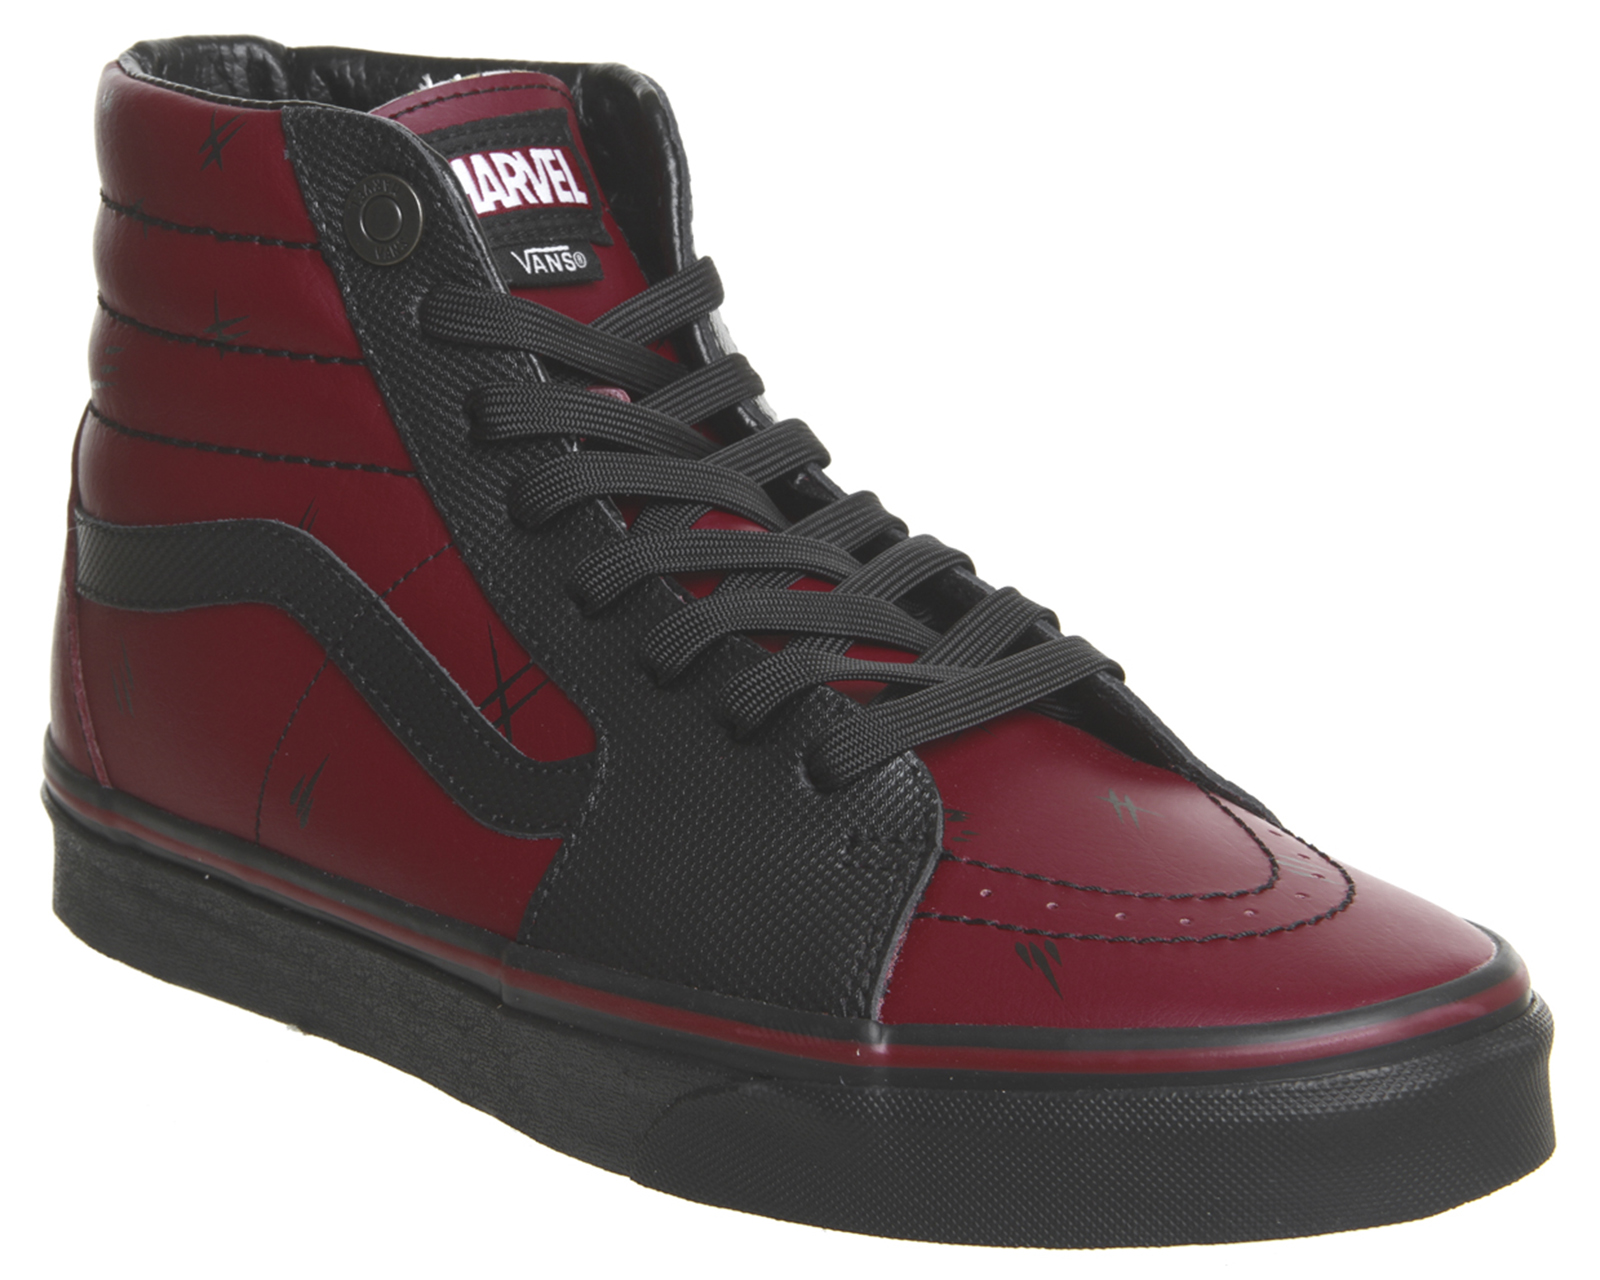 Get - vans sk8 hi deadpool - OFF 66% - Getting free delivery on the things  you buy every day - www.armaosgb.com.tr